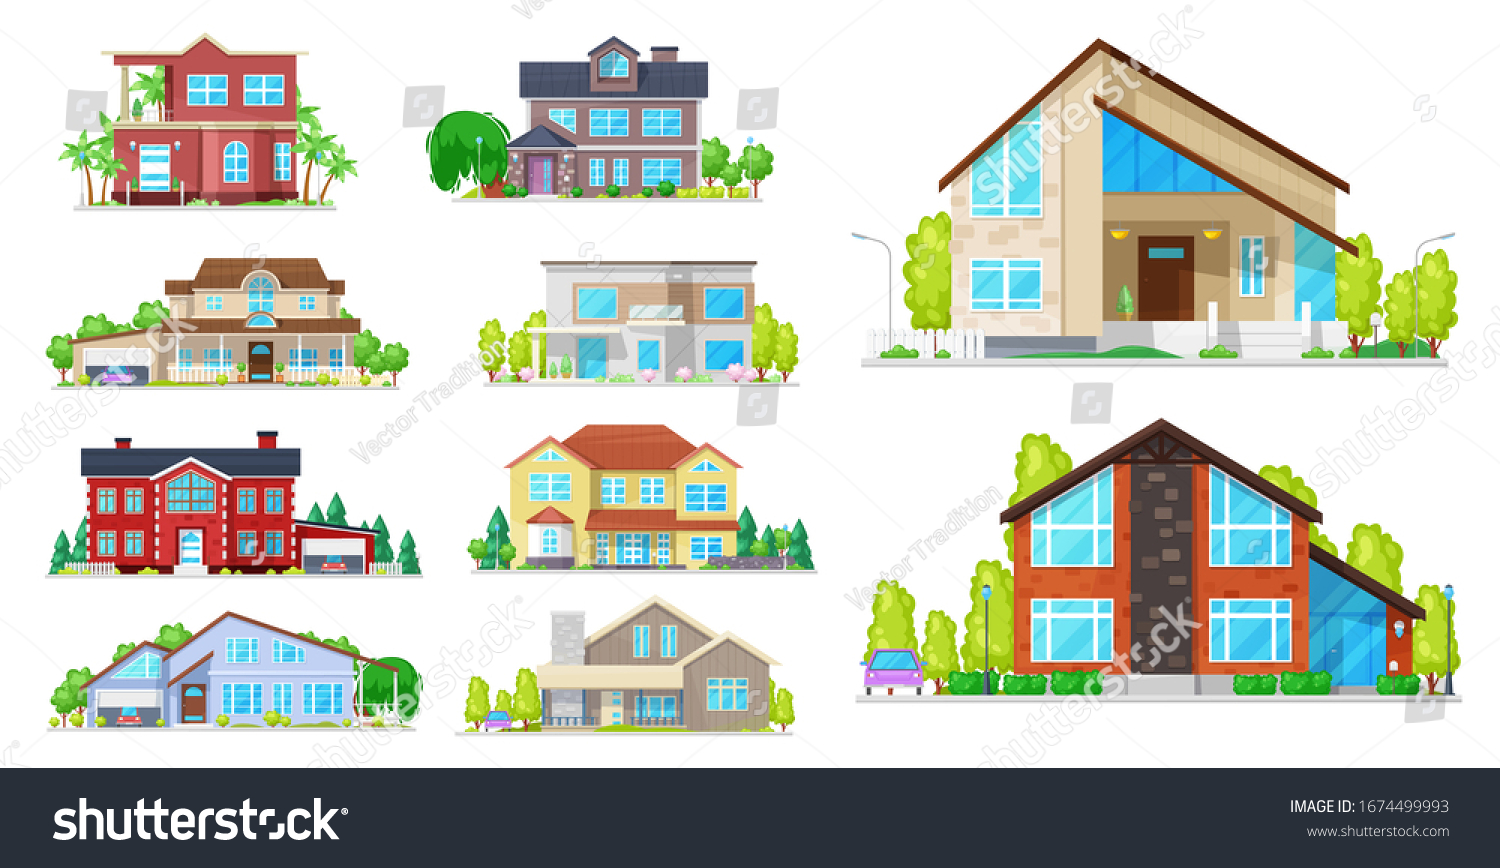 SVG of House building vector icons. Village home, cottage and villa, mansion, bungalow and townhouse, architecture and real estate industry. Exterior of buildings with windows, roofs, doors and garages svg